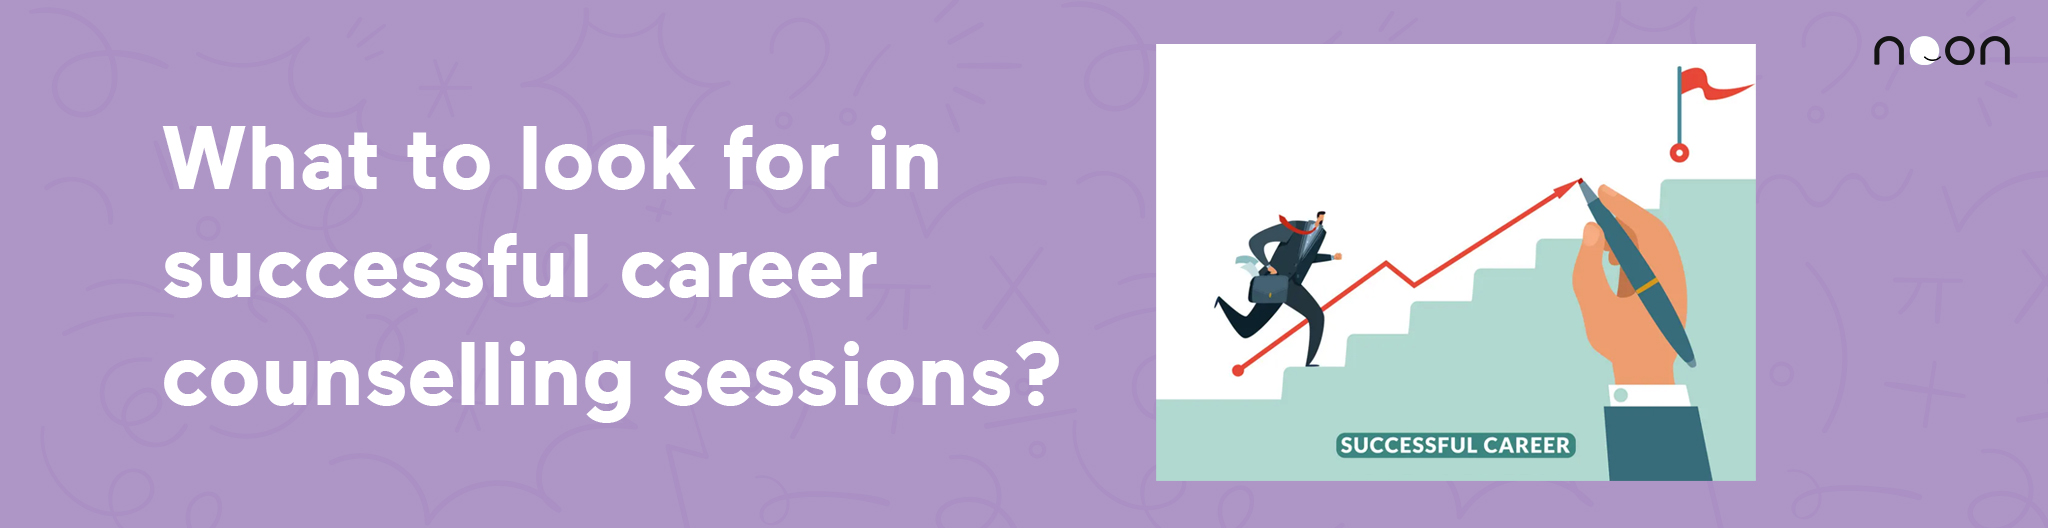 What to look for in successful career counselling sessions?